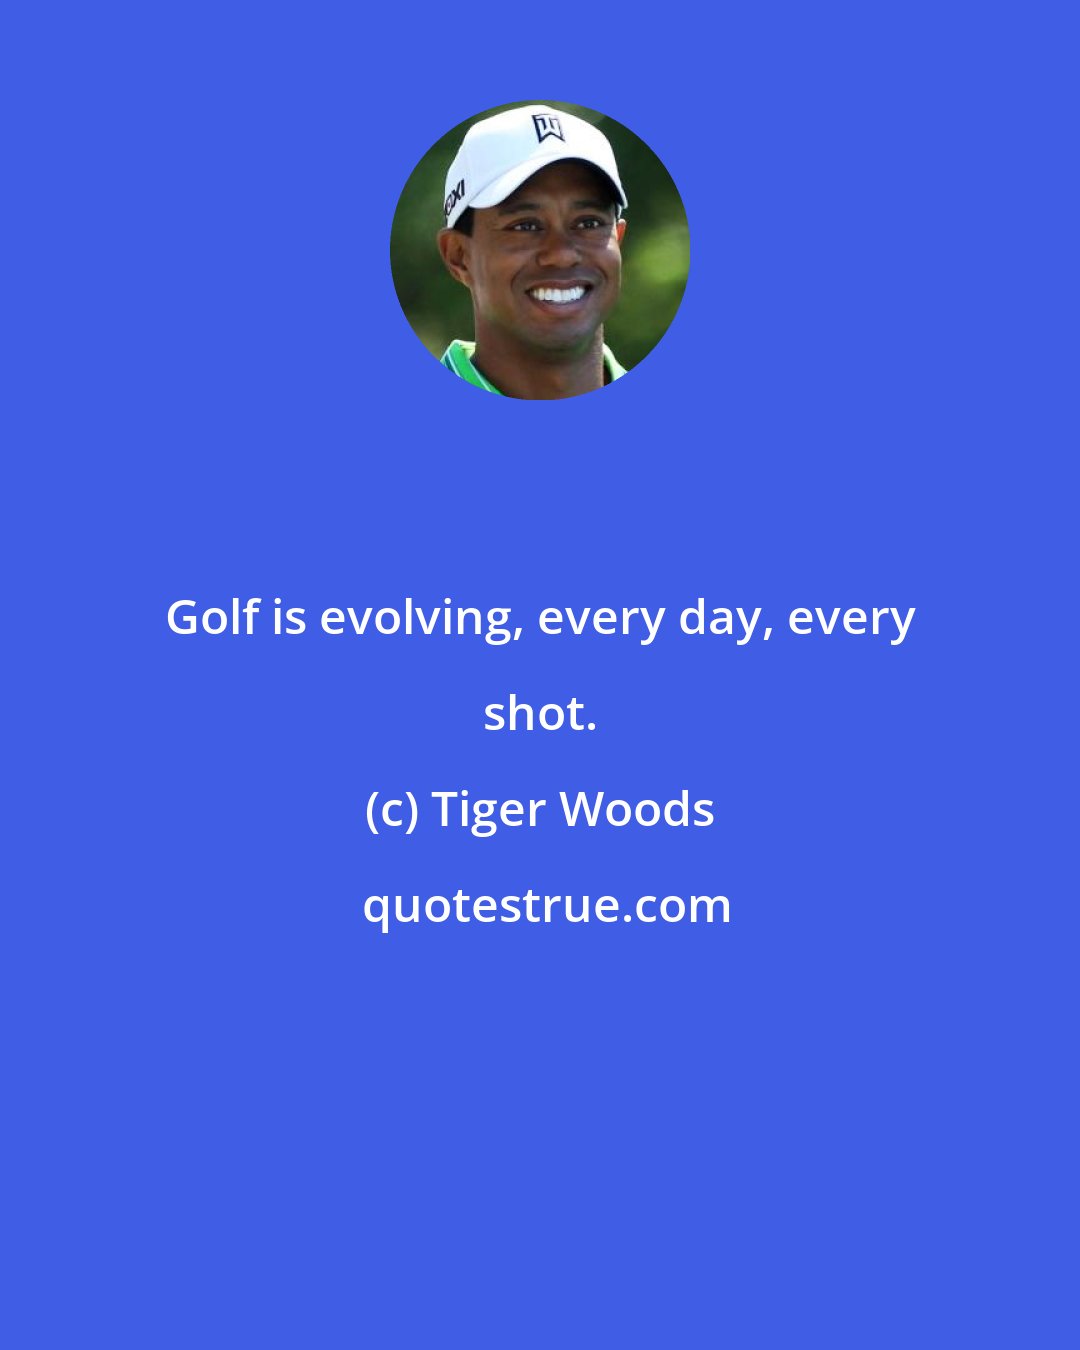 Tiger Woods: Golf is evolving, every day, every shot.